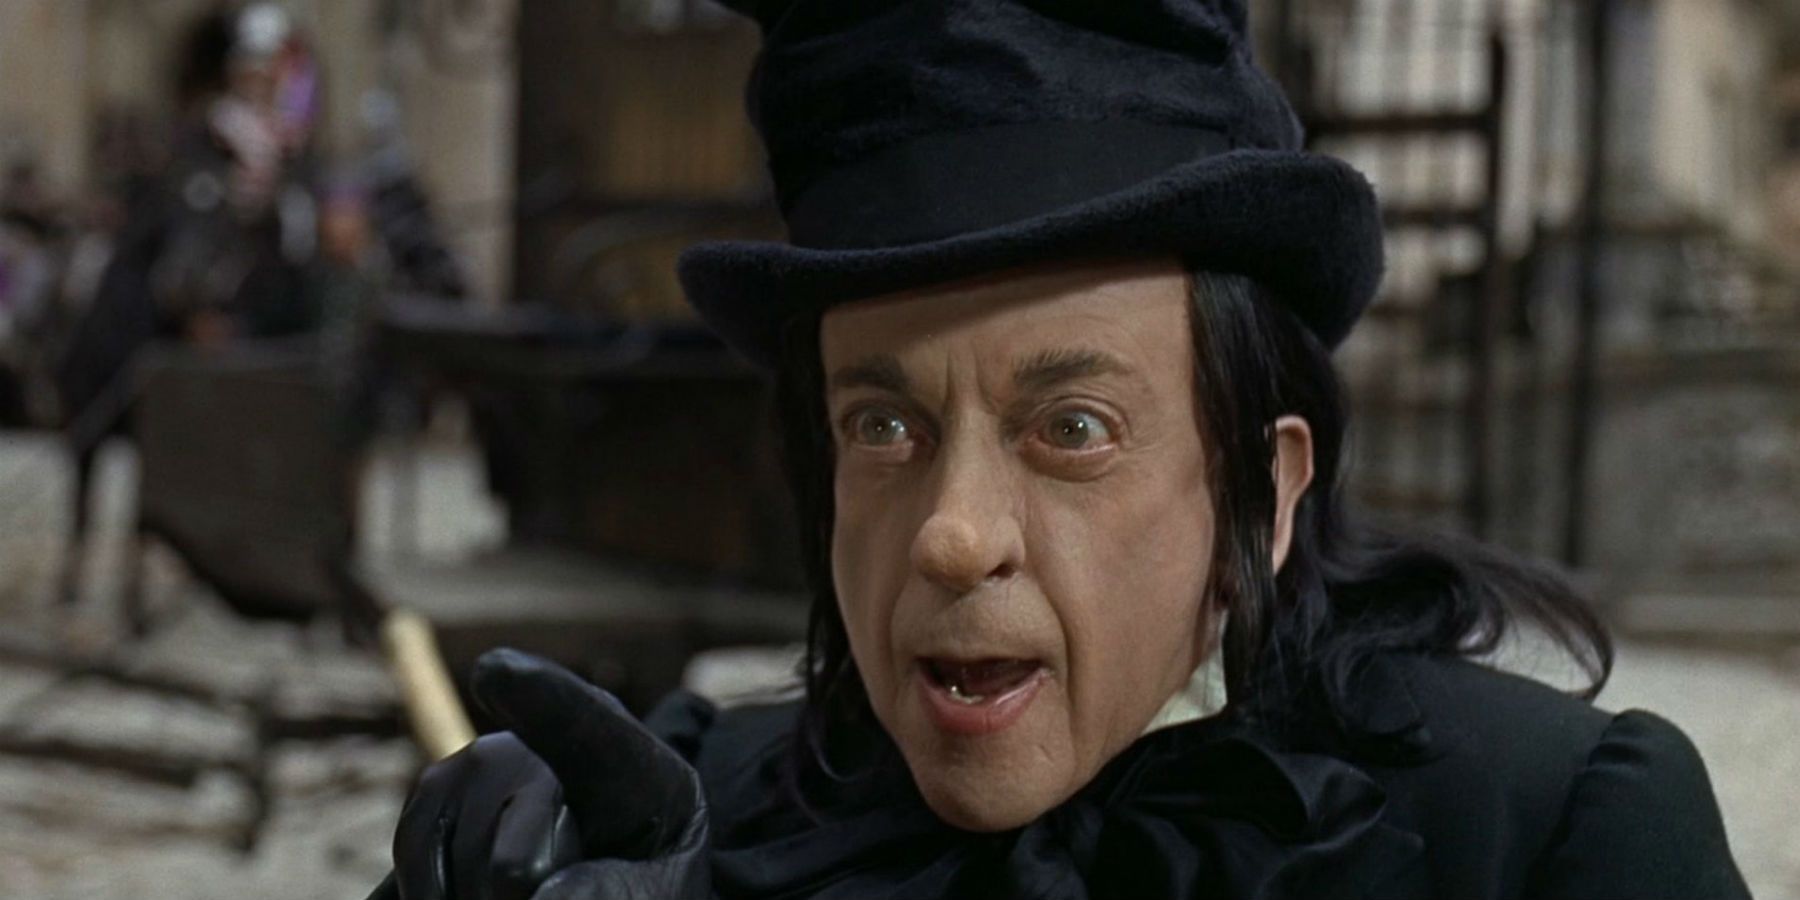 The Child Catcher dressed all in black in Chitty Chitty Bang Bang